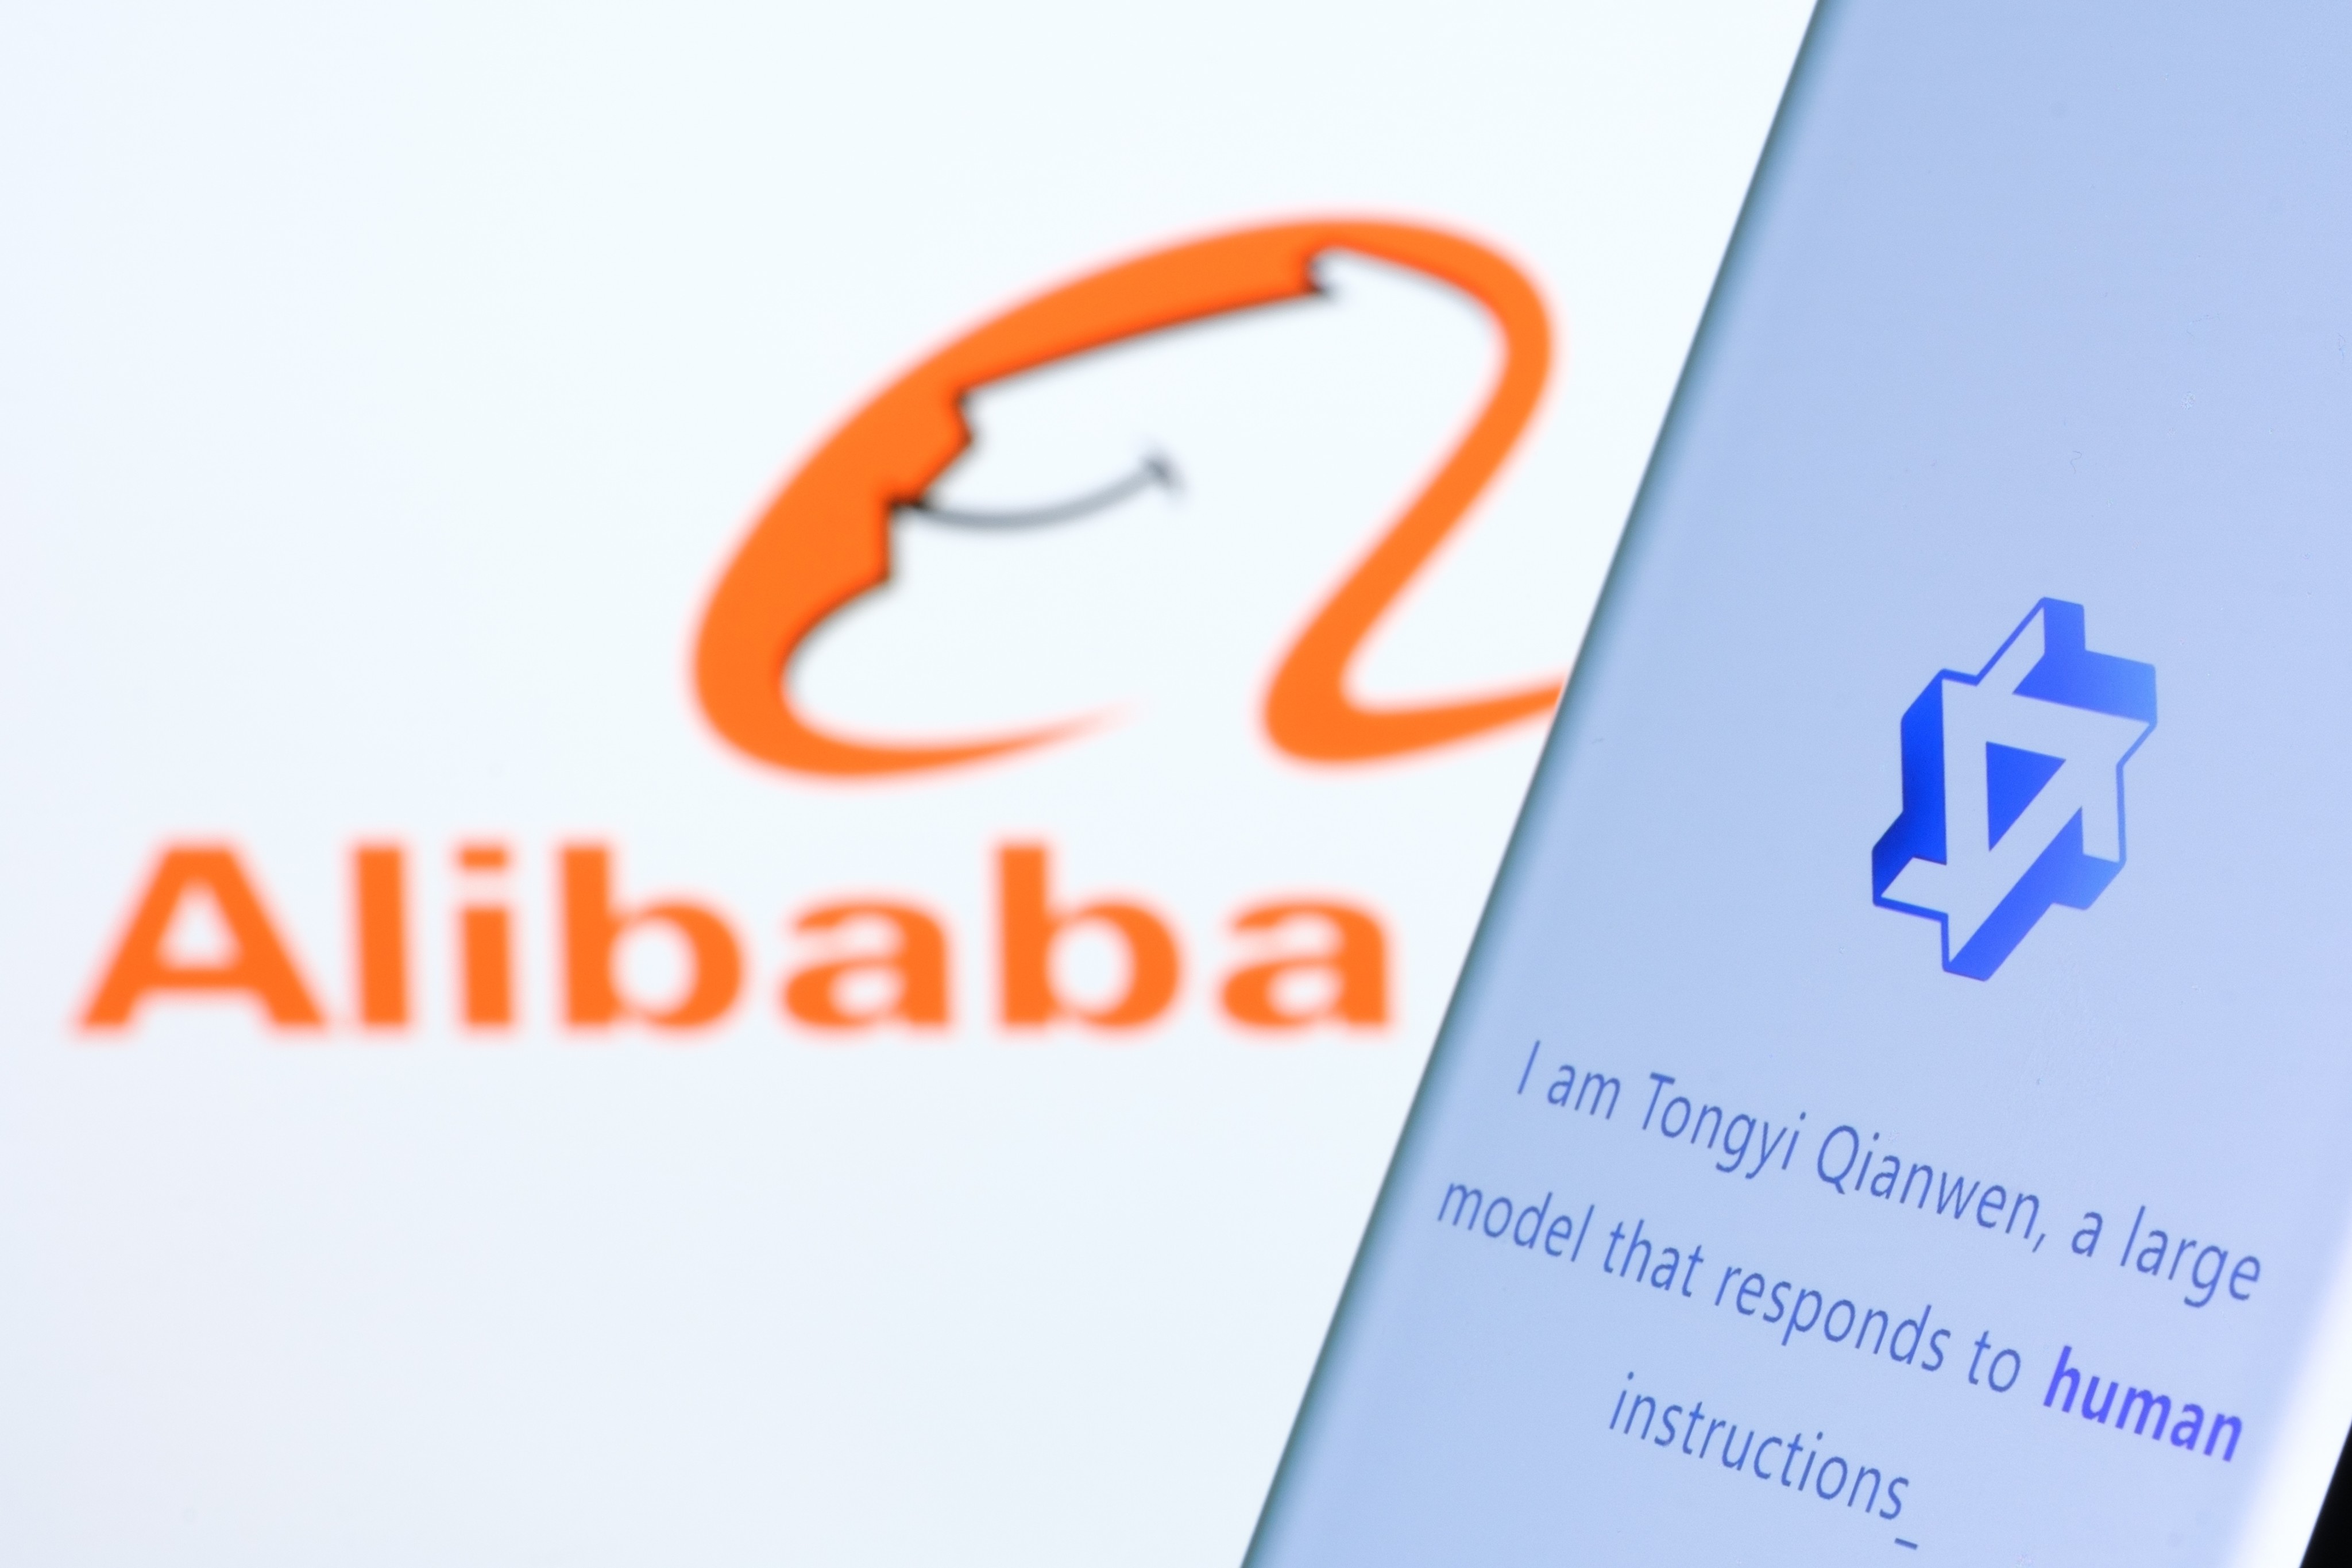 Alibaba Group Holding’s Tongyi Qianwen AI large language model family is already used by more than 90,000 corporate clients in China. Photo: Shutterstock